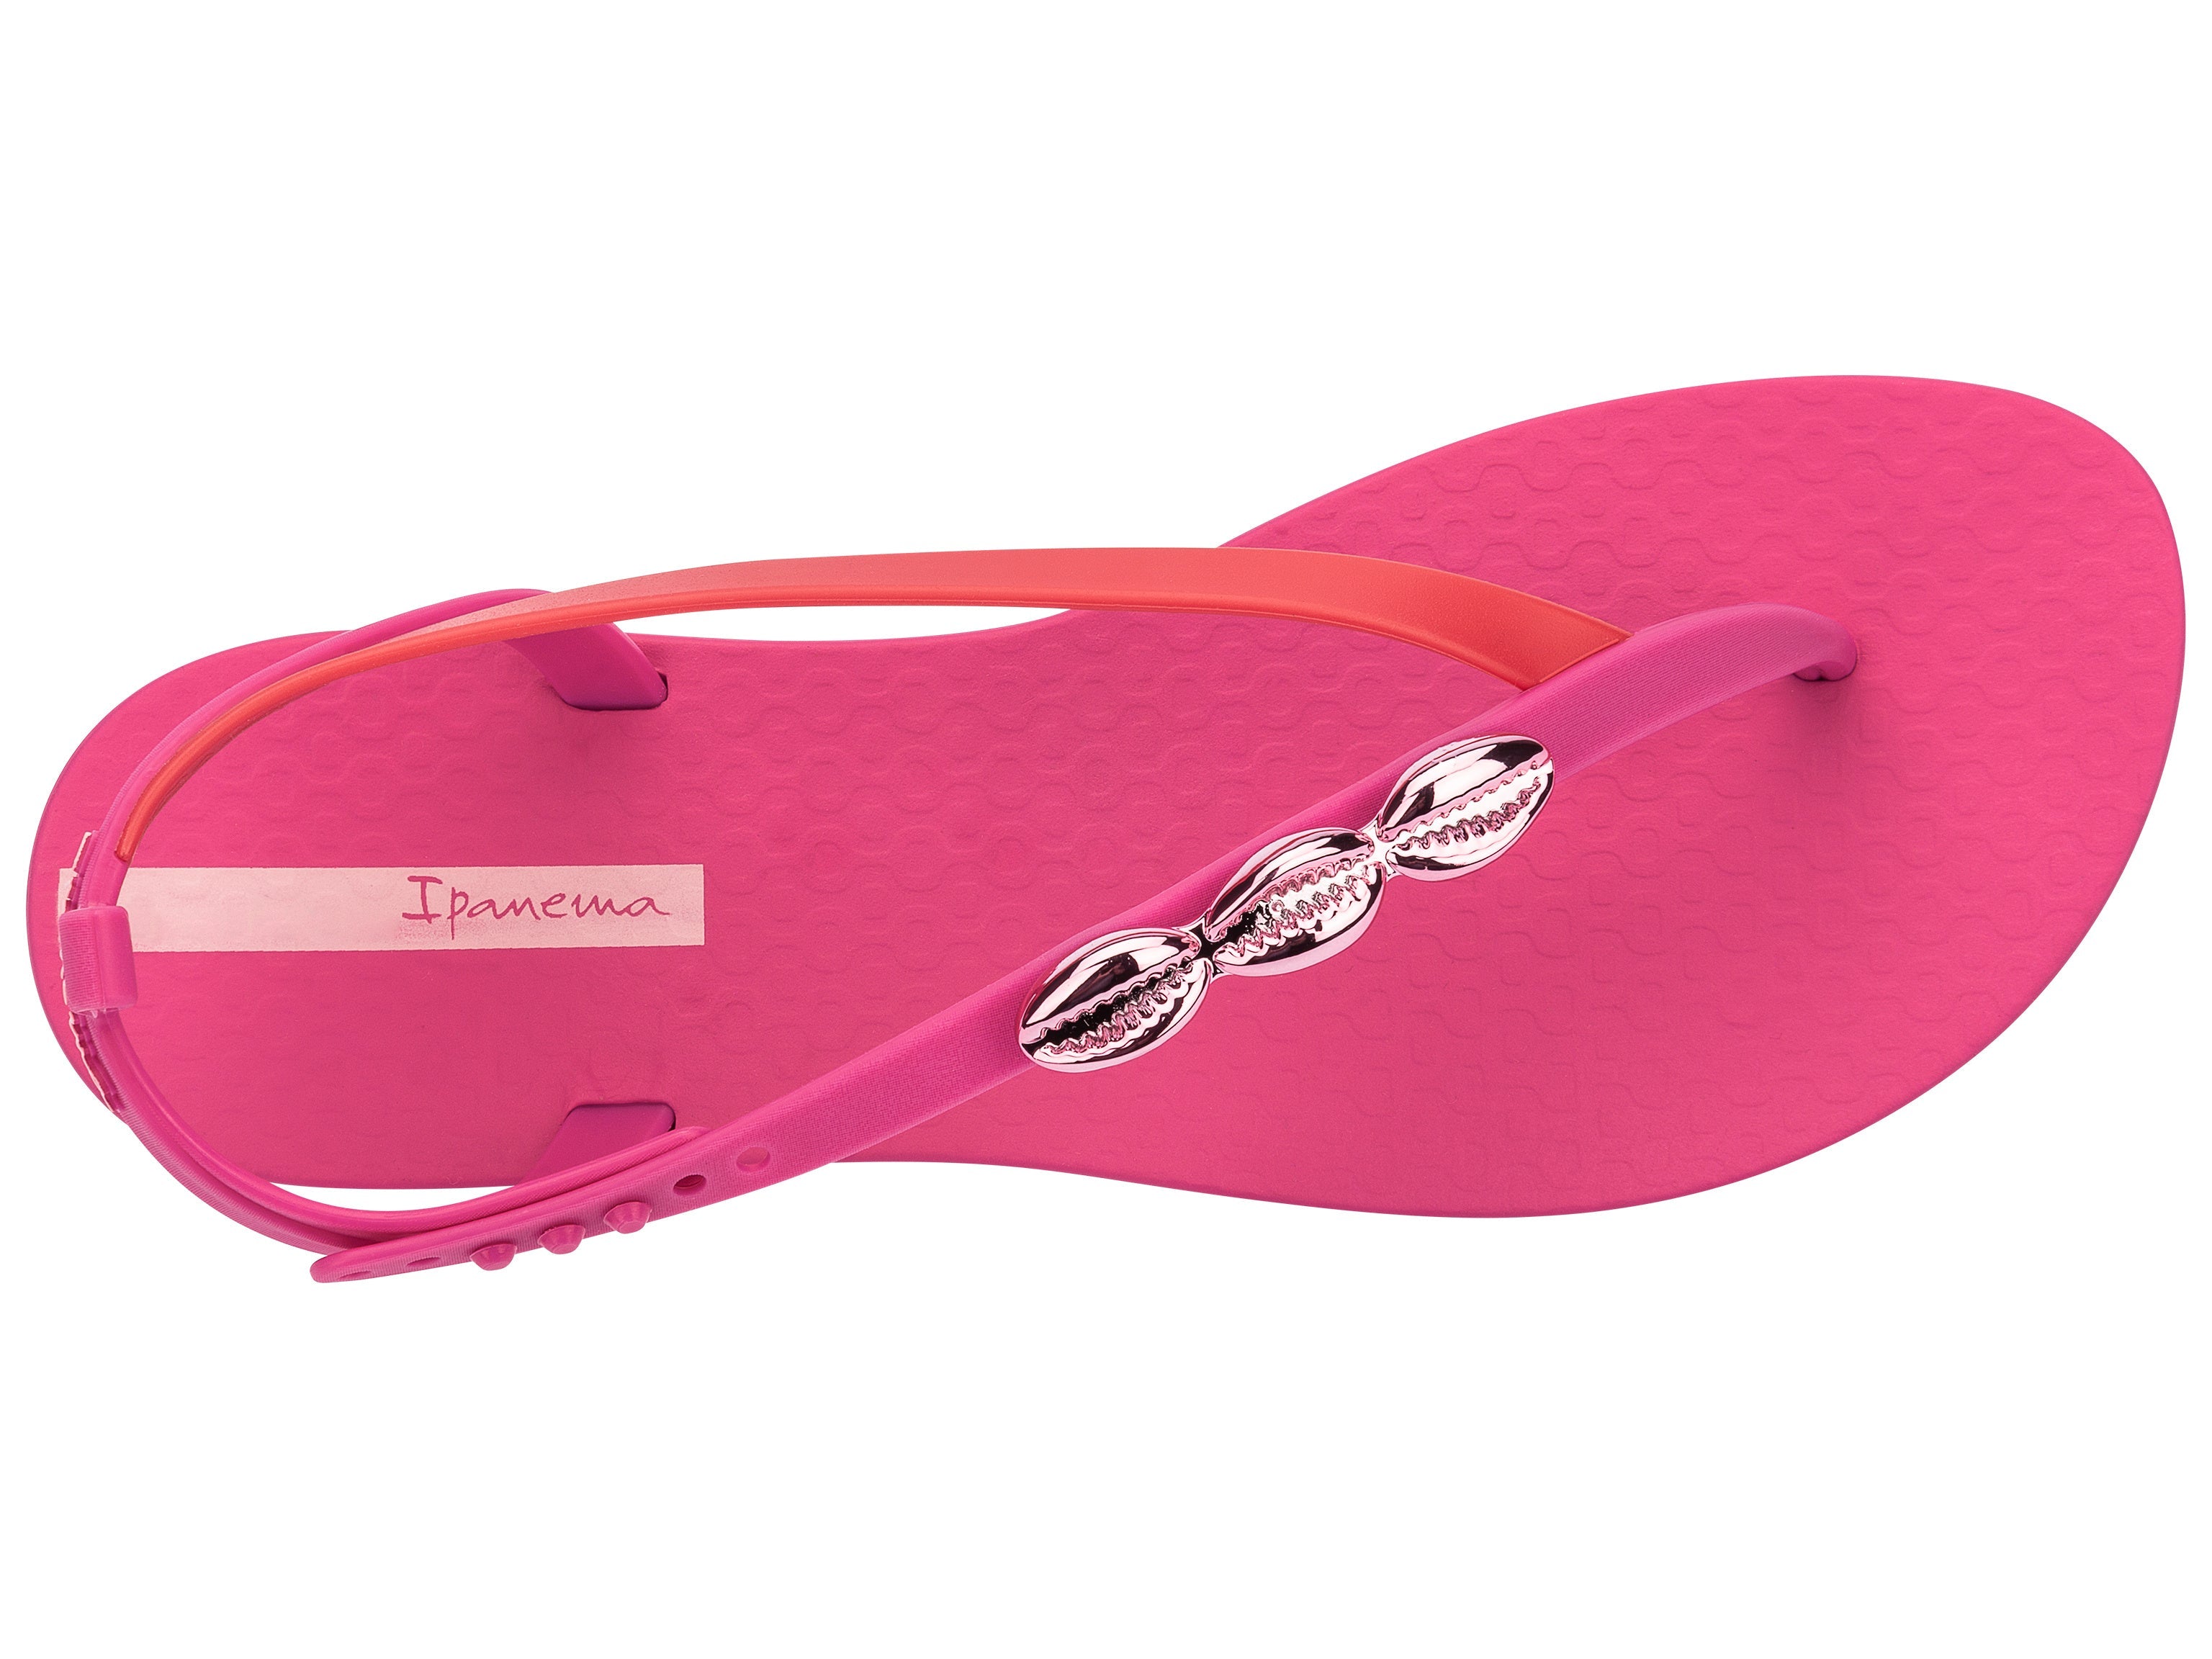 Top view of a pink Ipanema Salty women's sandal with 3 pink metallic shells on the strap.